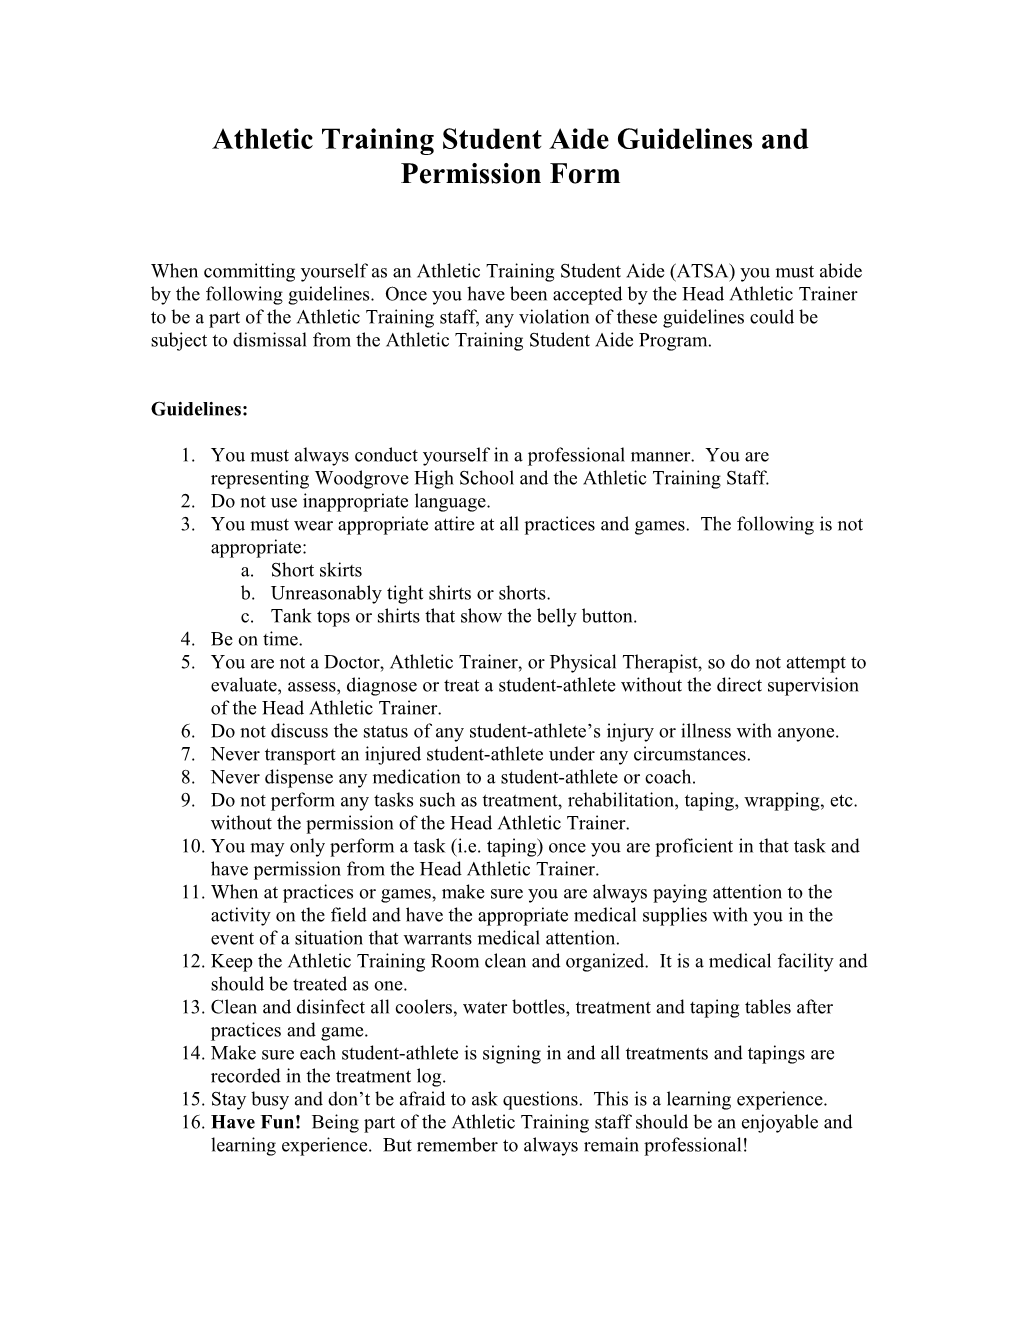 Athletic Training Student Aide Guidelines and Permission Form